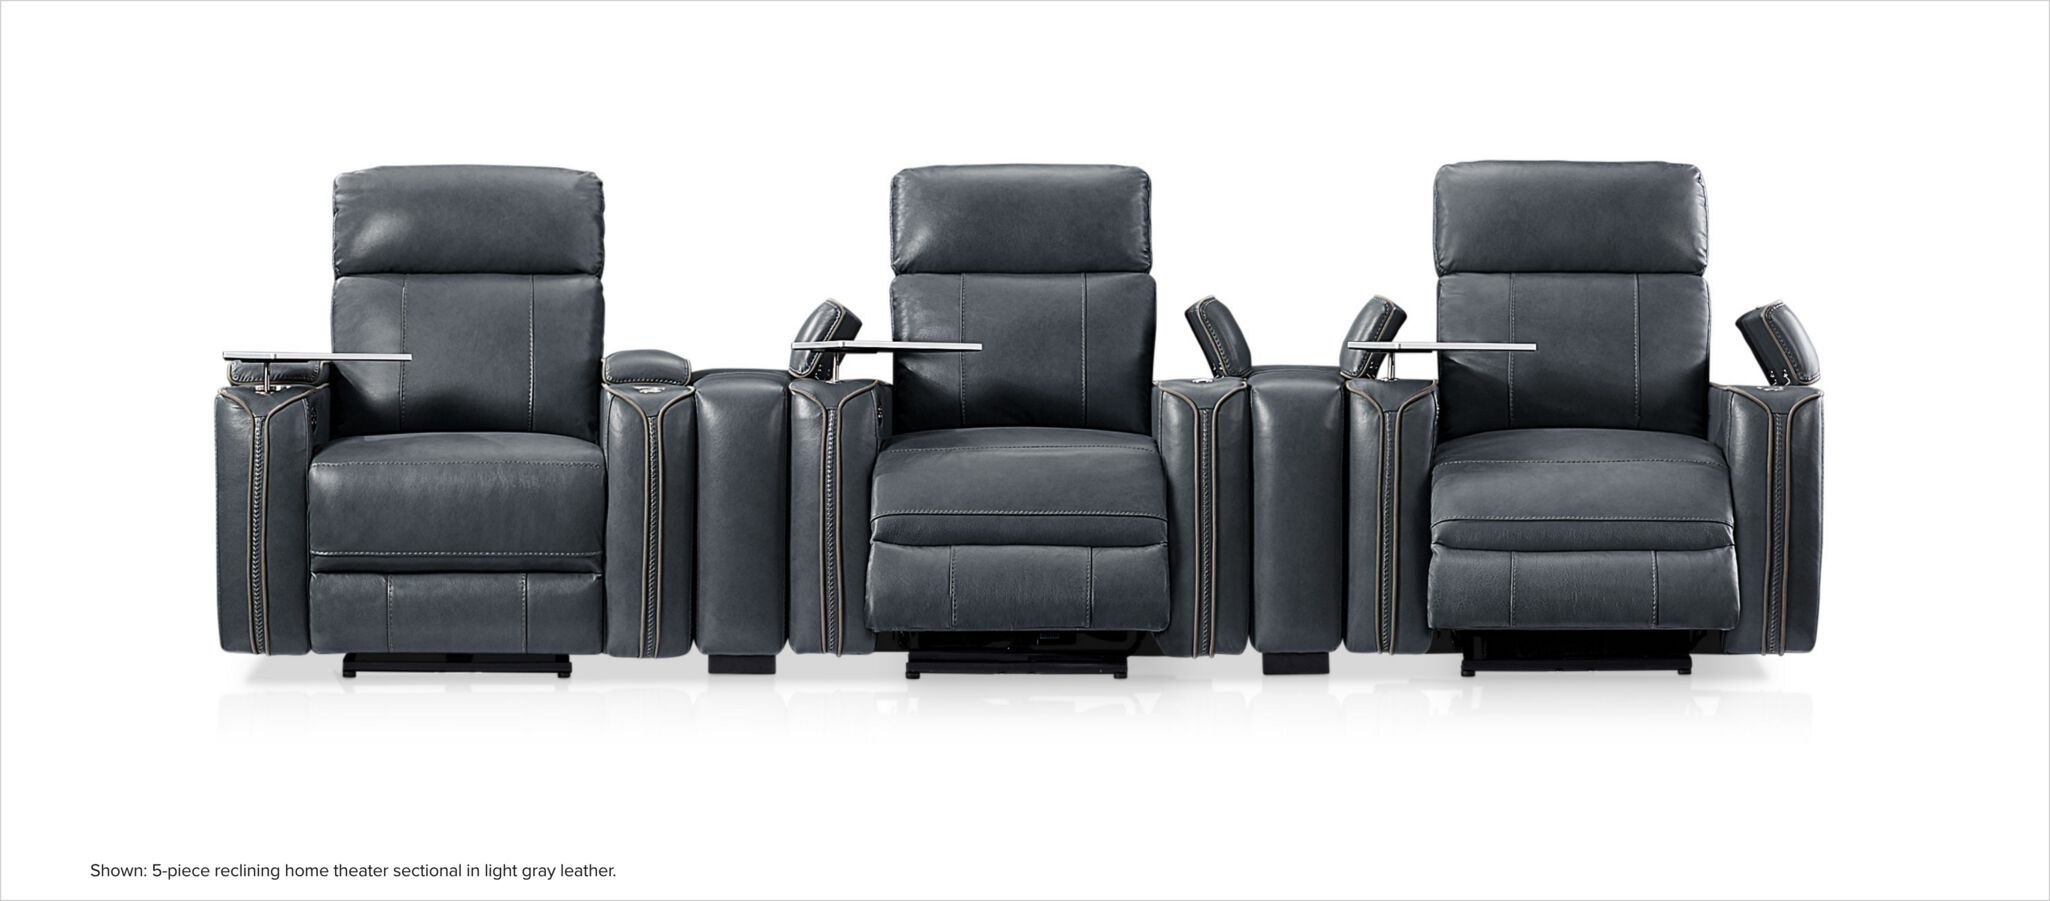 Leo 5-piece reclining home theater sectional in light gray leather.